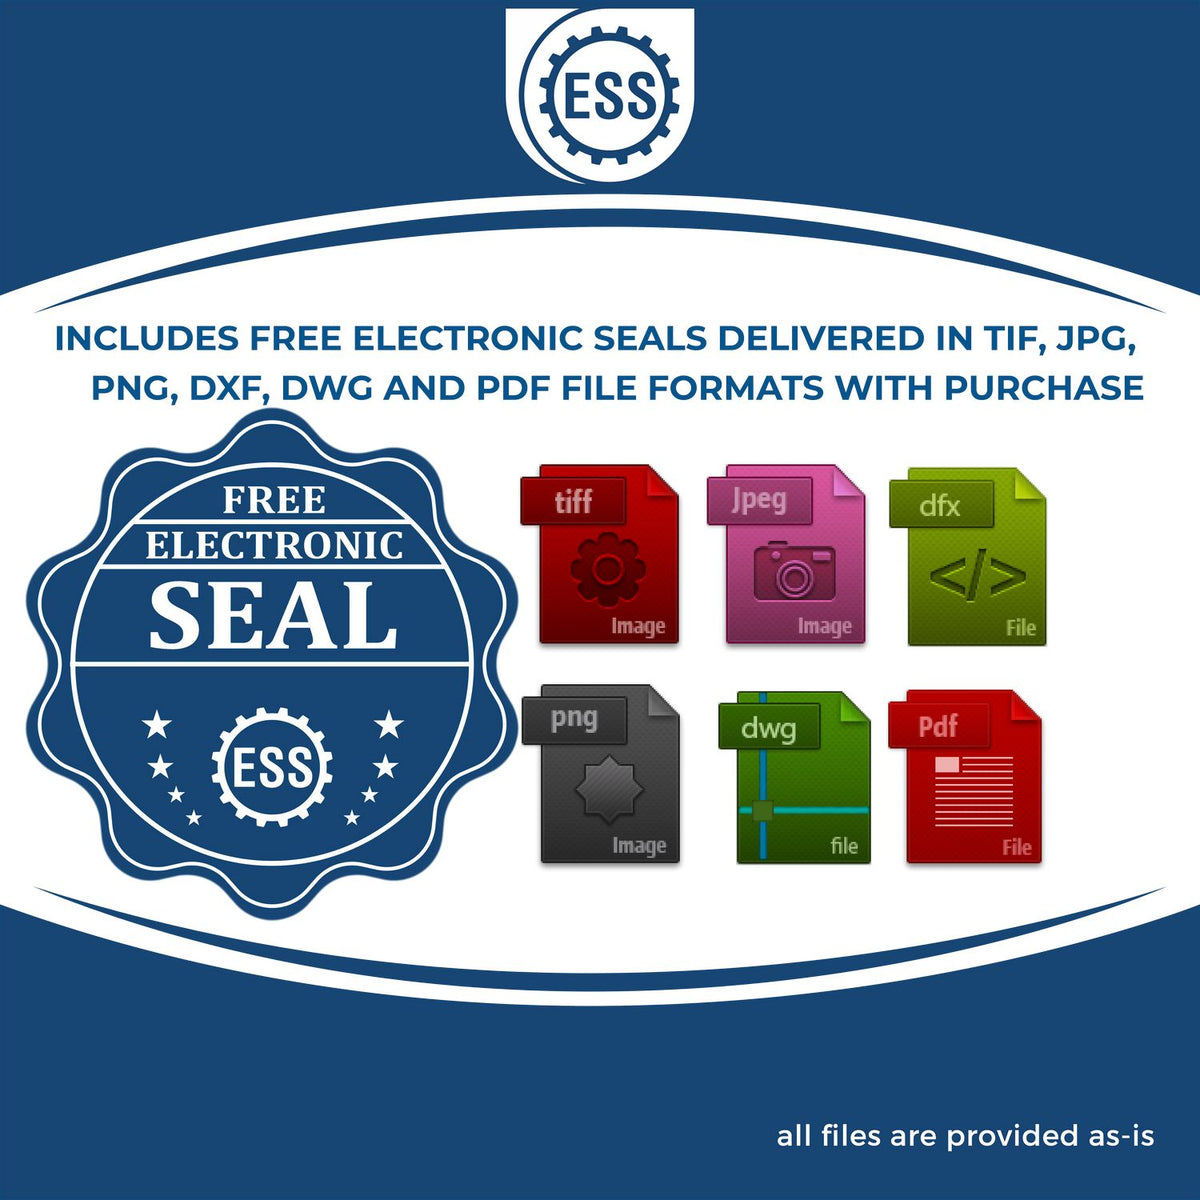 An infographic for the free electronic seal for the Handheld Iowa Land Surveyor Seal illustrating the different file type icons such as DXF, DWG, TIF, JPG and PNG.